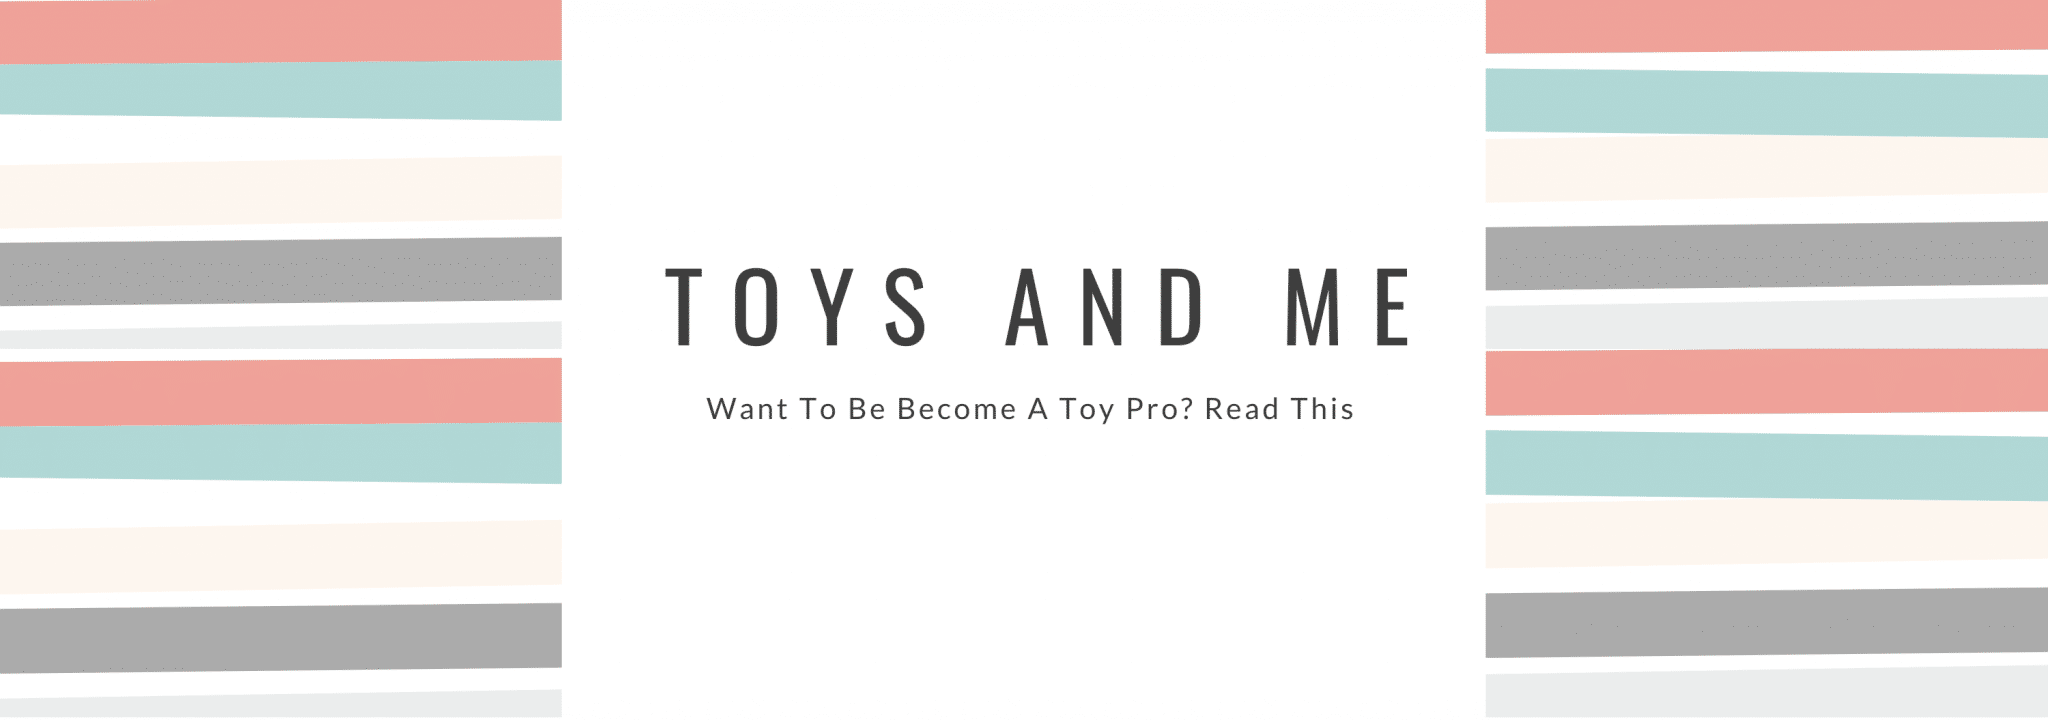 Toys and me